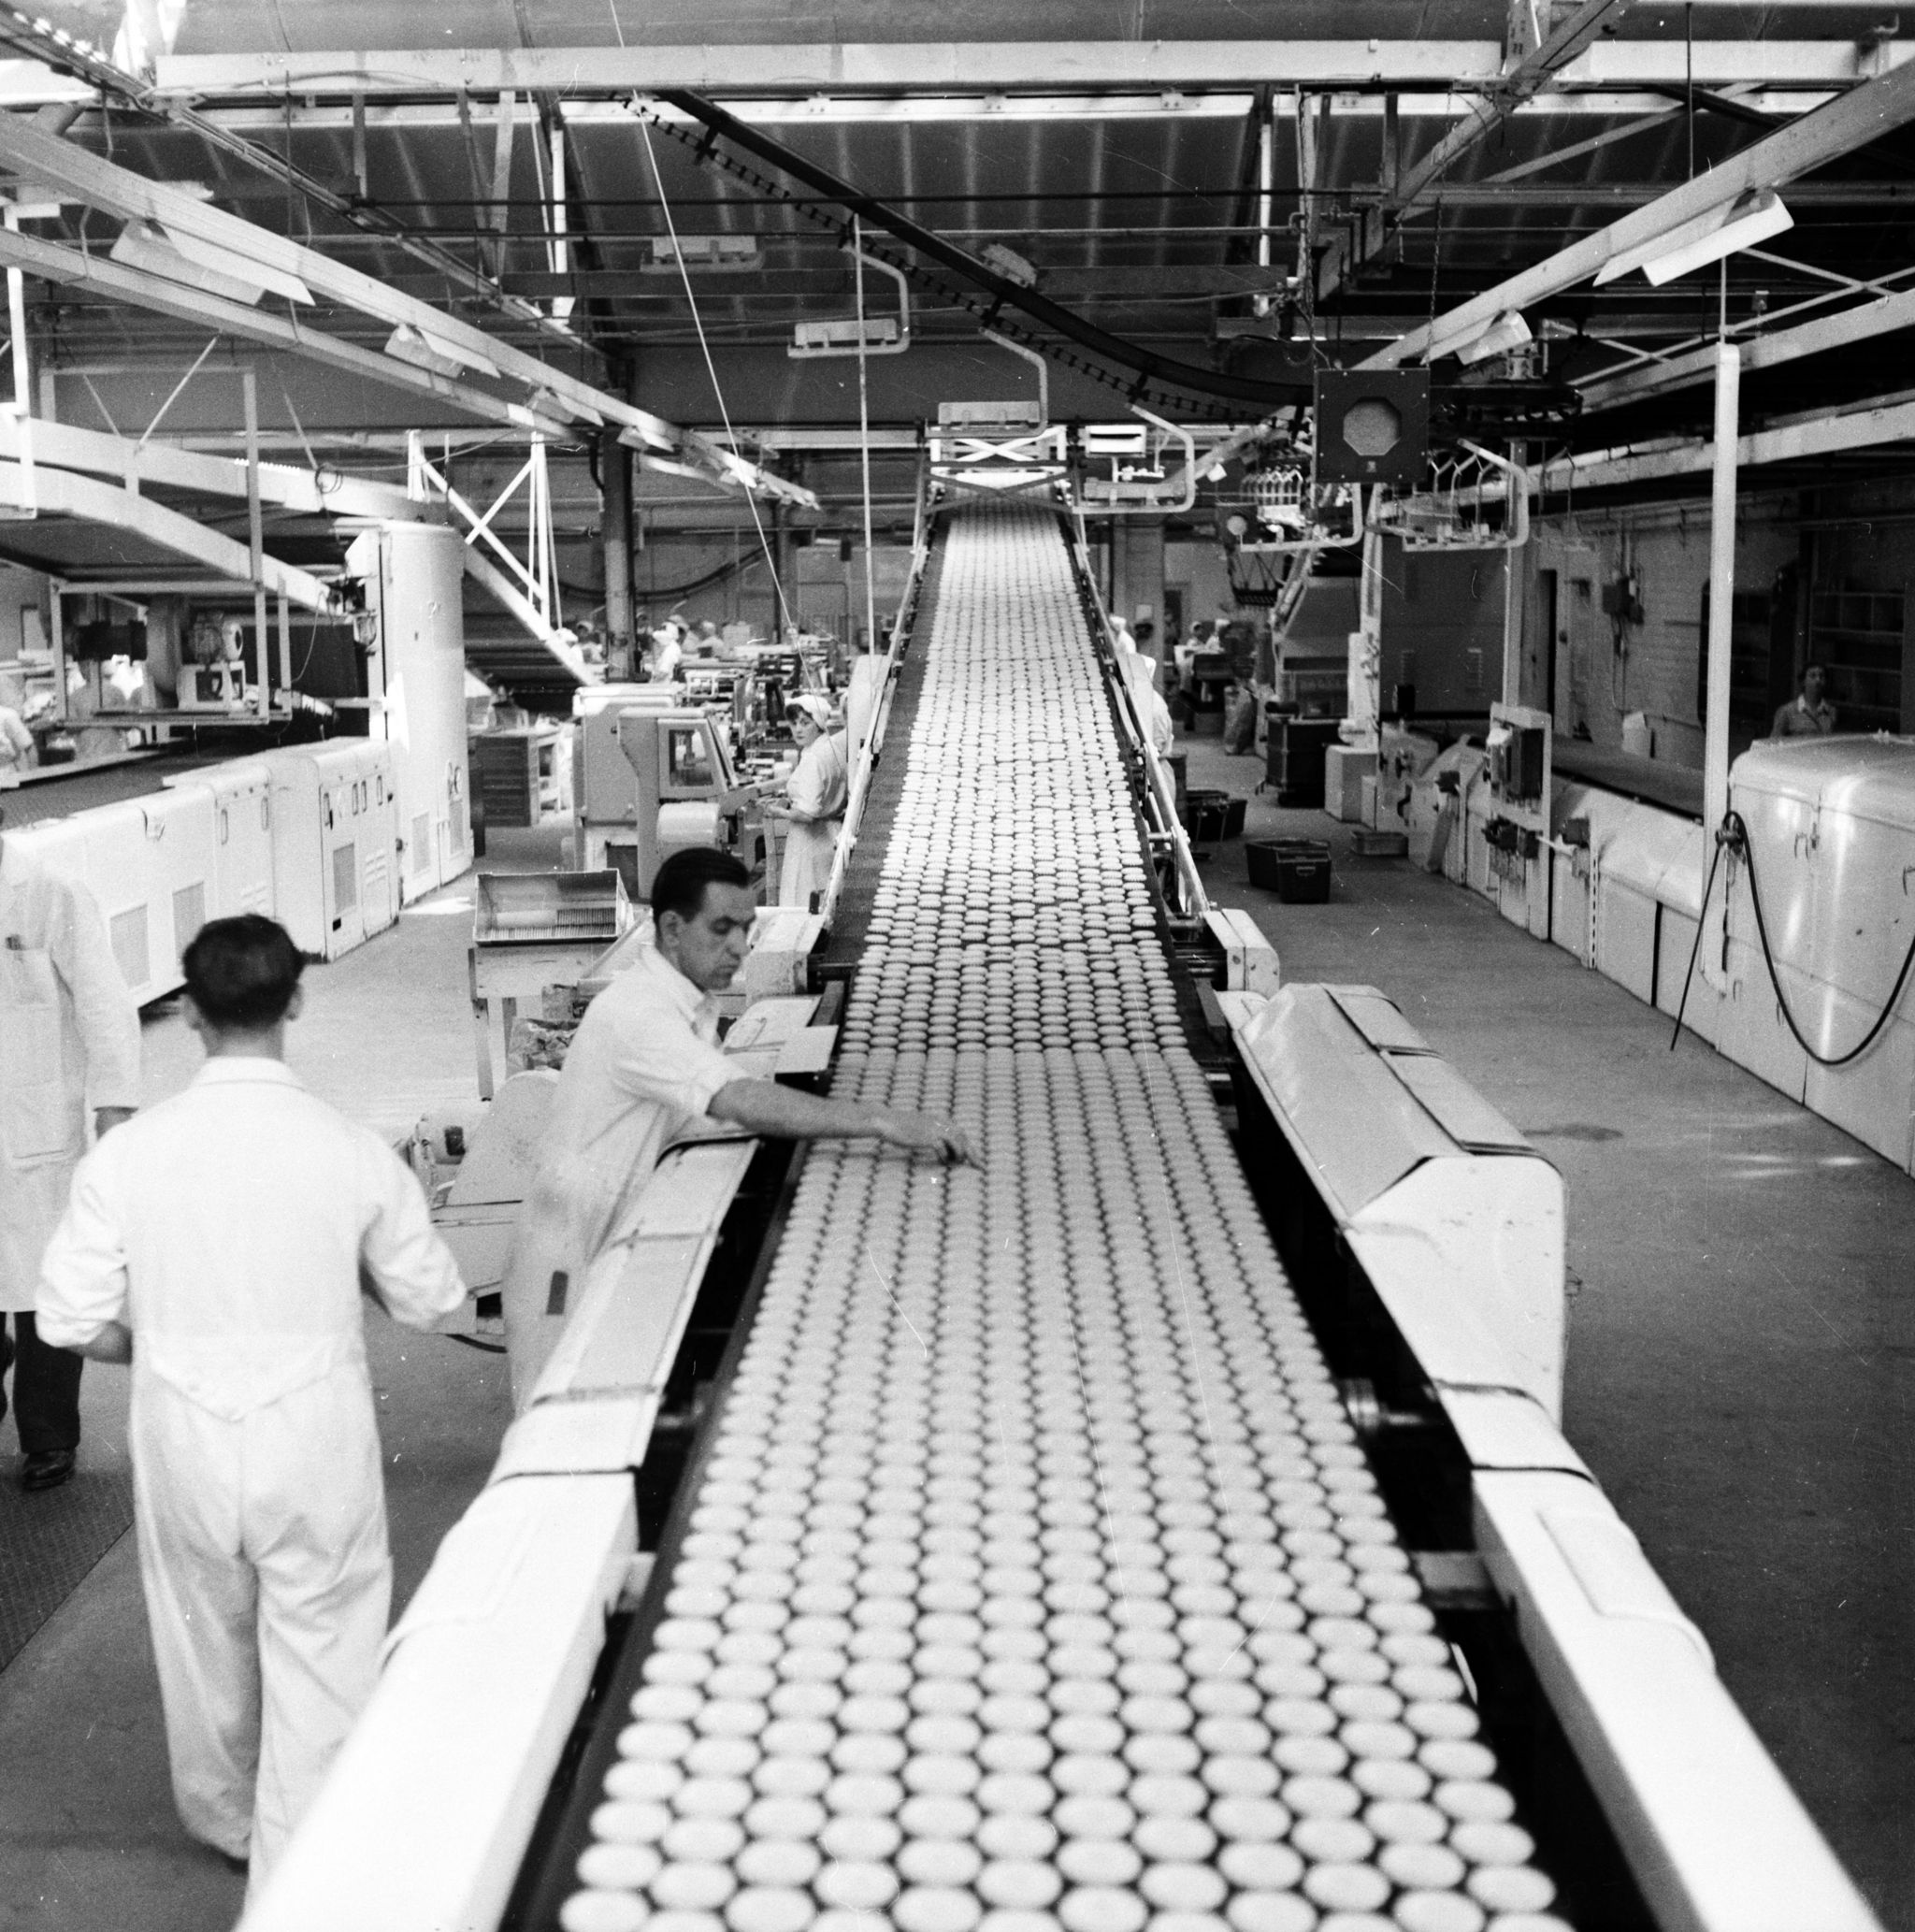 20th August 1955: Workers checking the quality of biscuits on a conveyor belt in the Glengarry Bakery of William Macdonald and Sons, Glasgow. This company's 2- hour production line generates a constant stream of biscuits and produces a quarter of Britain's total chocolate biscuit output. Original Publication: Picture Post - 7942 - Let Glasgow Flourish! - pub. 1955 (Photo by Haywood Magee/Picture Post/Hulton Archive/Getty Images)